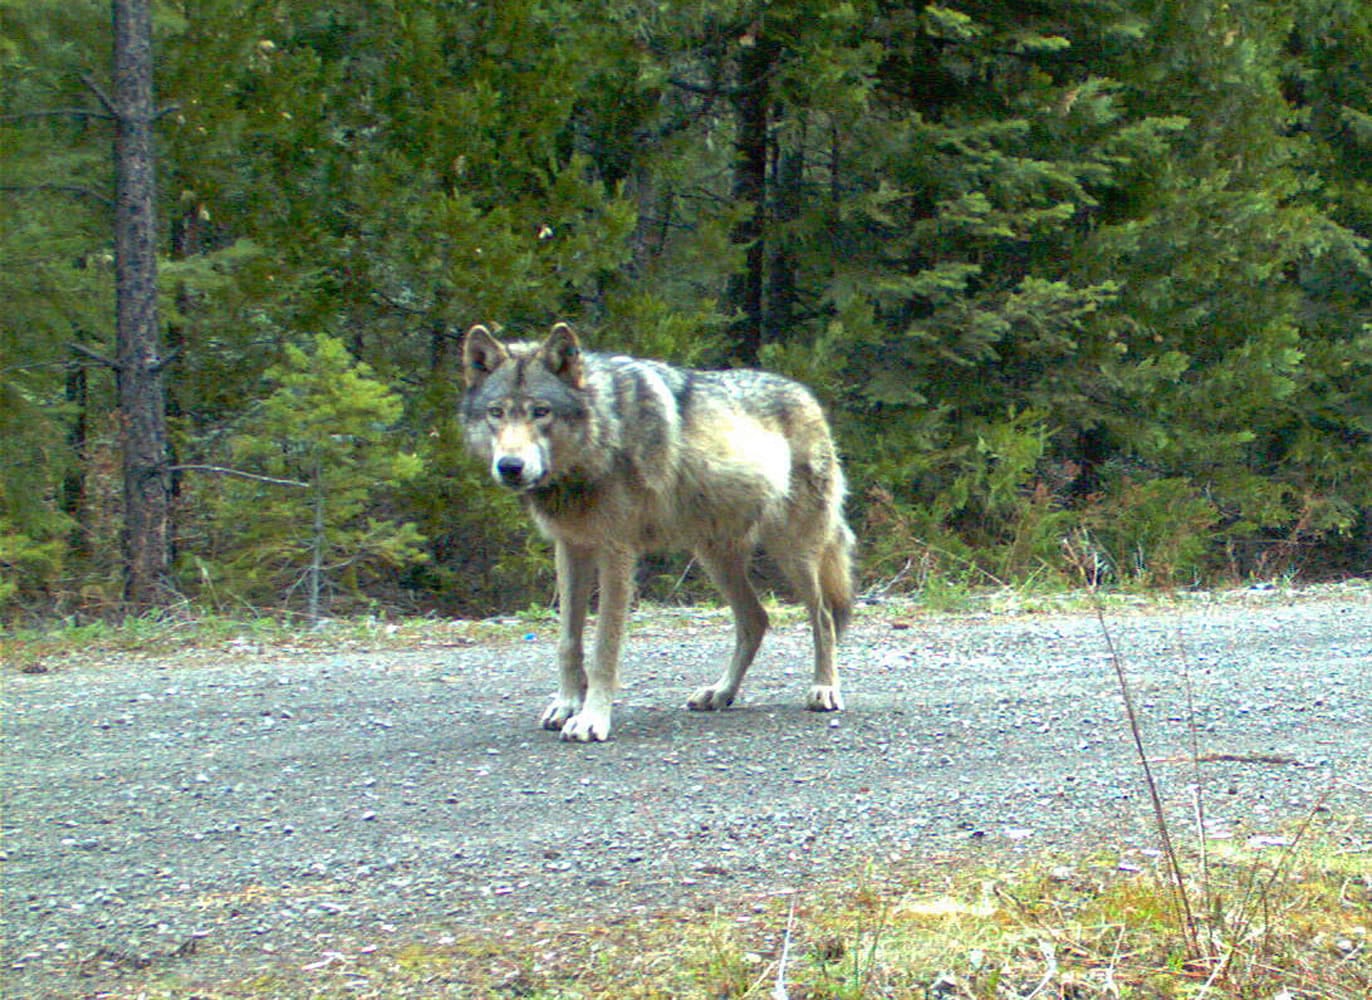 The wolf OR-7 is seen May 3, 2014, on the Rogue River-Siskiyou National Forest in southwest Oregon. The GPS collar that allowed people around the world to track the movements of Oregon&#039;s famous wandering wolf has stopped working. State officials say the battery has died, and efforts to put a new collar on OR-7 were unsuccessful.